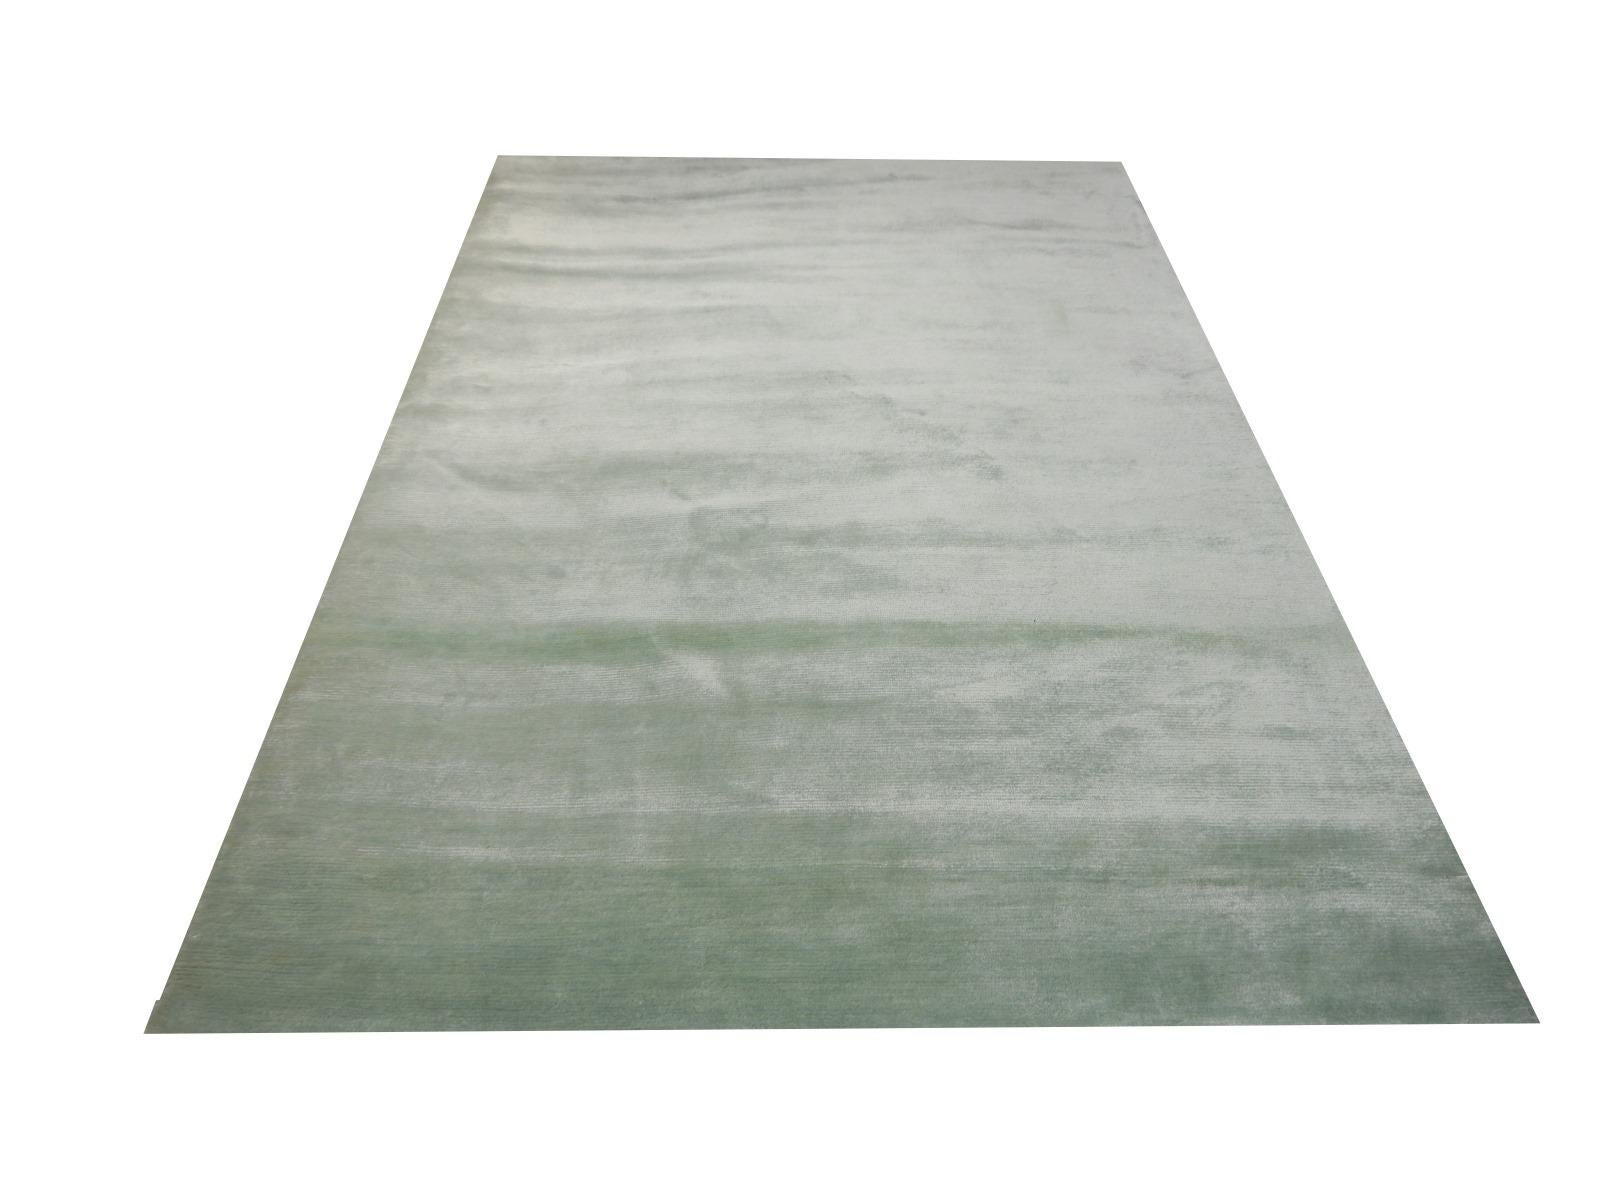 Perfect plain rug Collection color ice water in bamboo silk by Djoharian Design

This contemporary plain rug design from the Djoharian Collection is hand knotted in extra fine 100 knot per square inch quality, all made of hand spun bamboo silk.